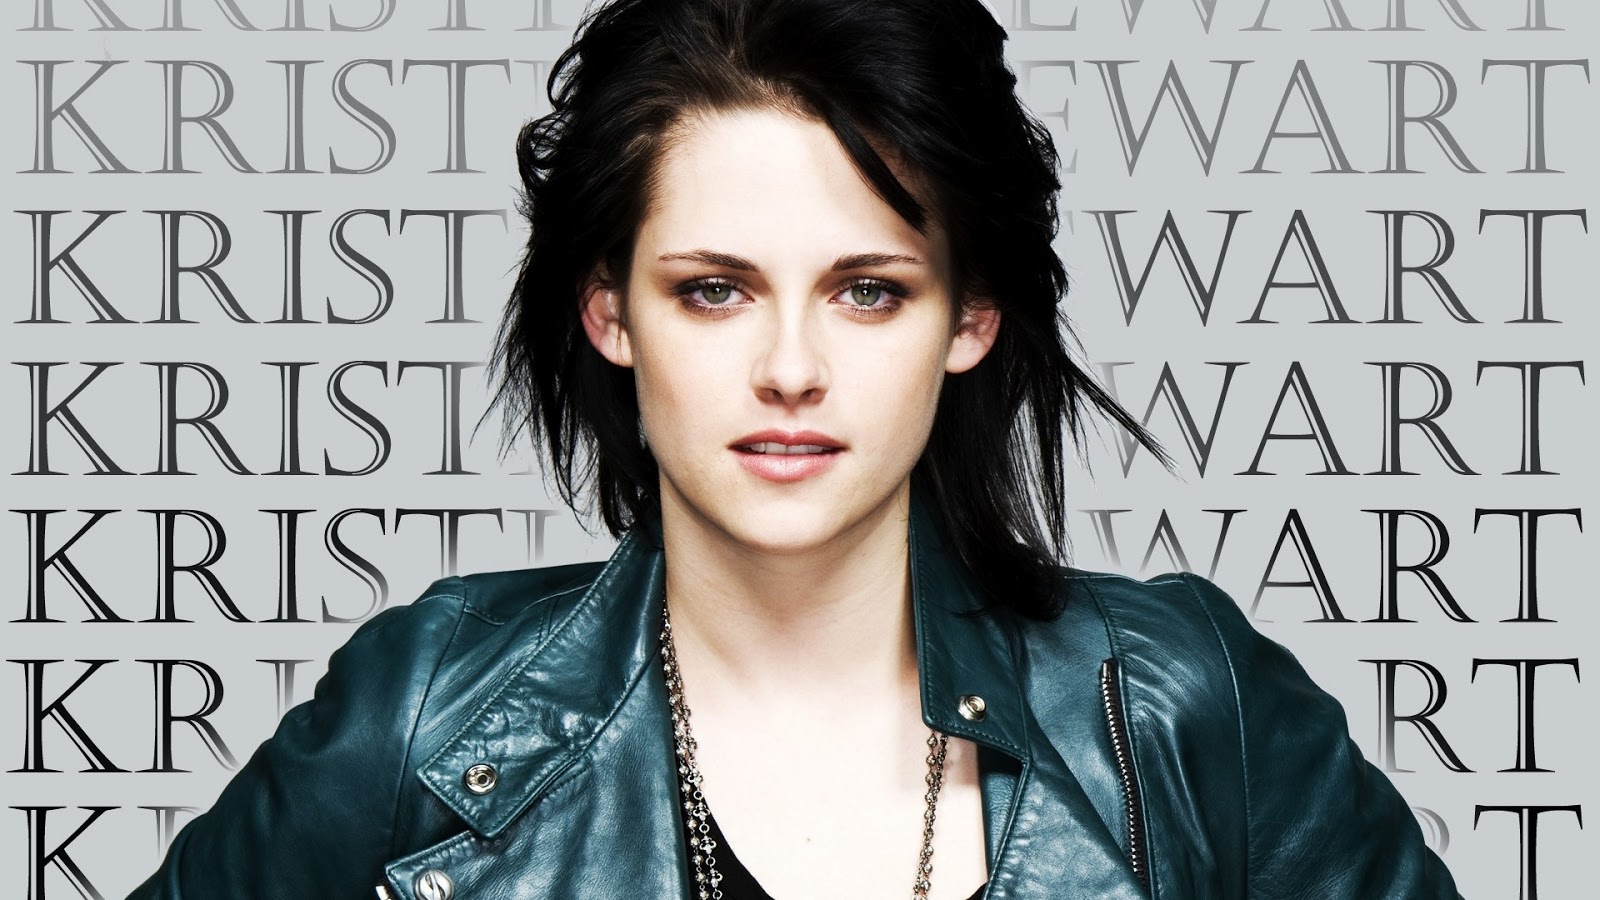 Kristen Stewart Image You Can See And